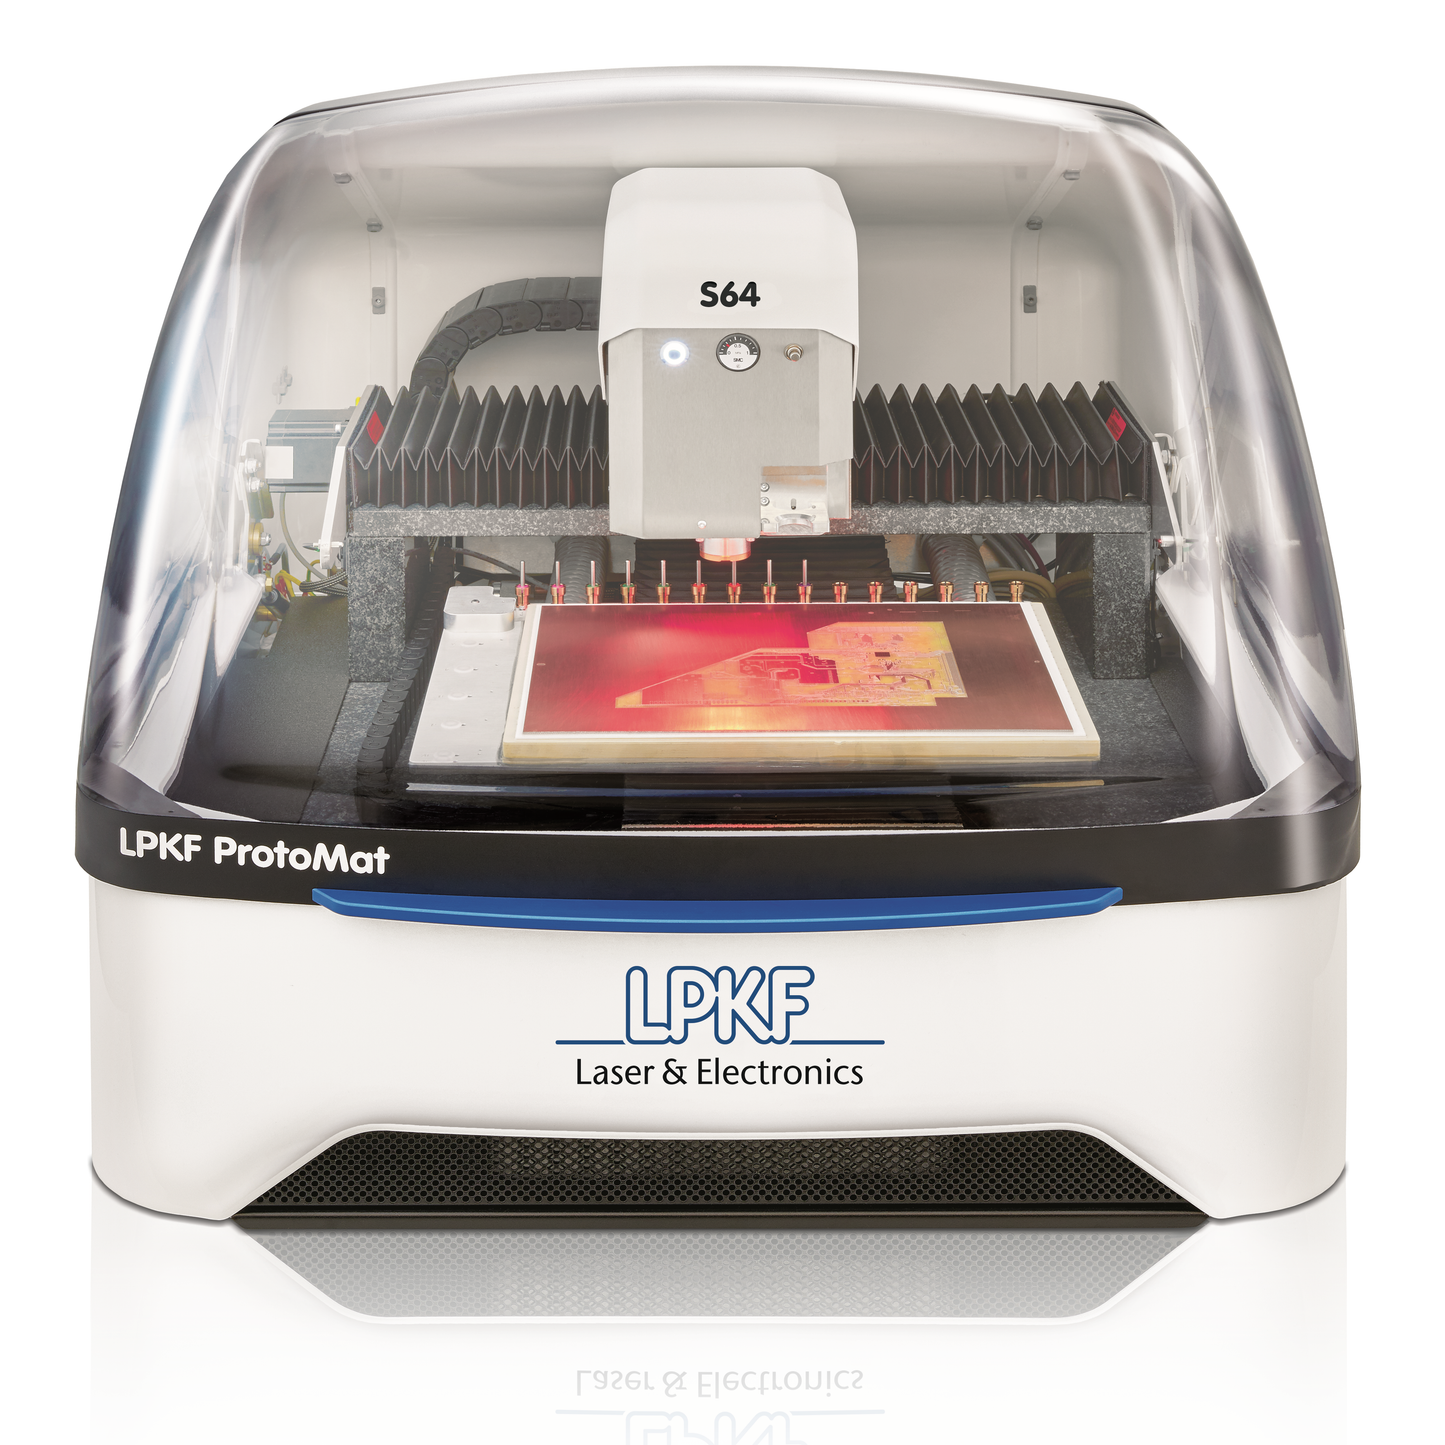 LPKF Protomat S64 PCB Prototyping Machine - ensure optimally controlled, exact milling depth also monitor tool change process